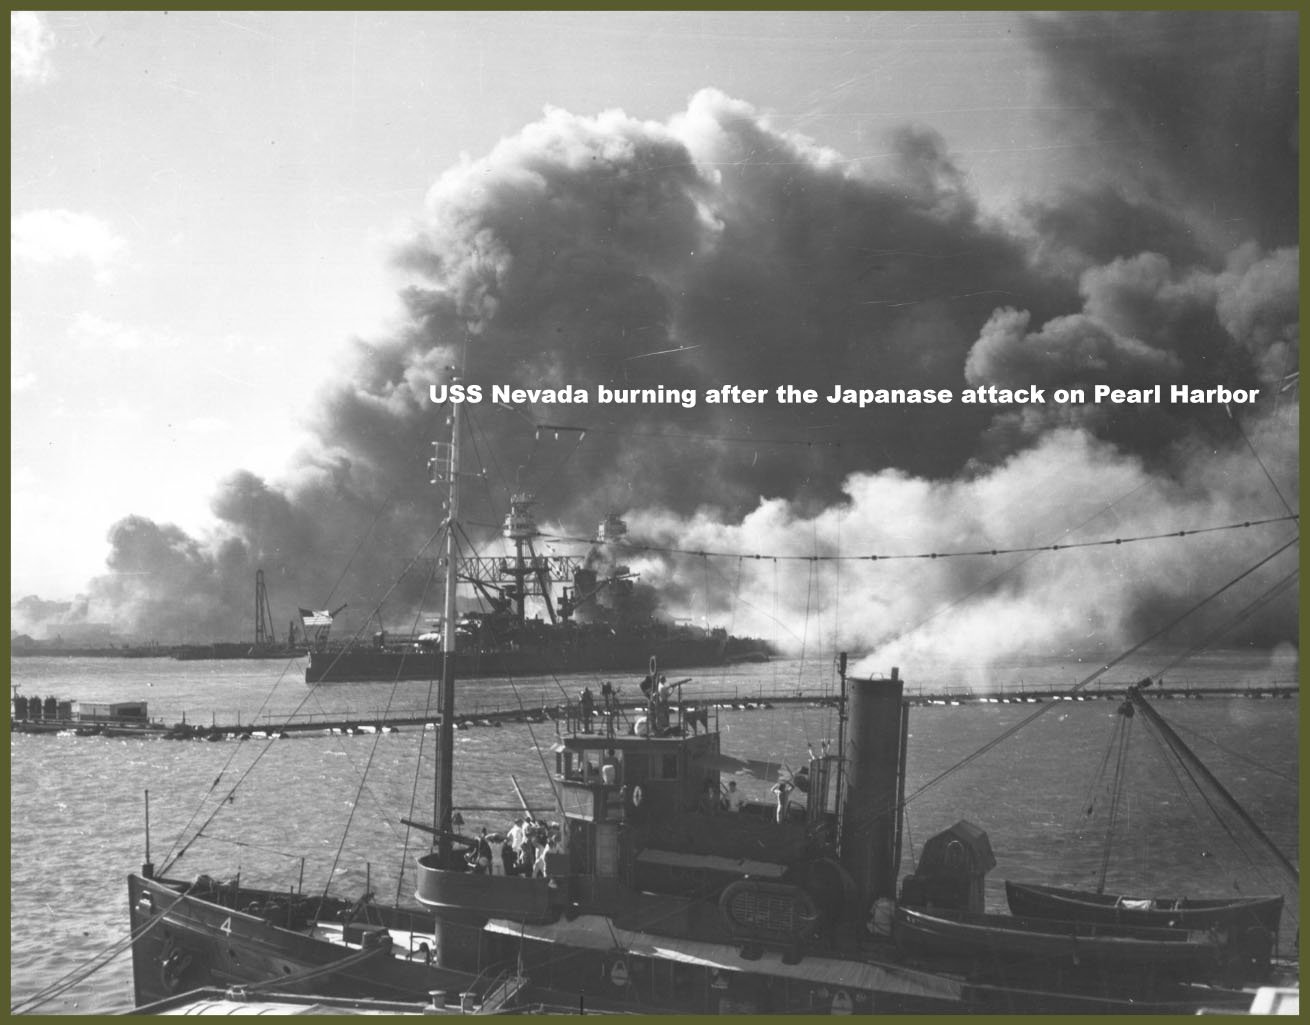 USS Nevada after the Japanese Attack on Pearl Harbor